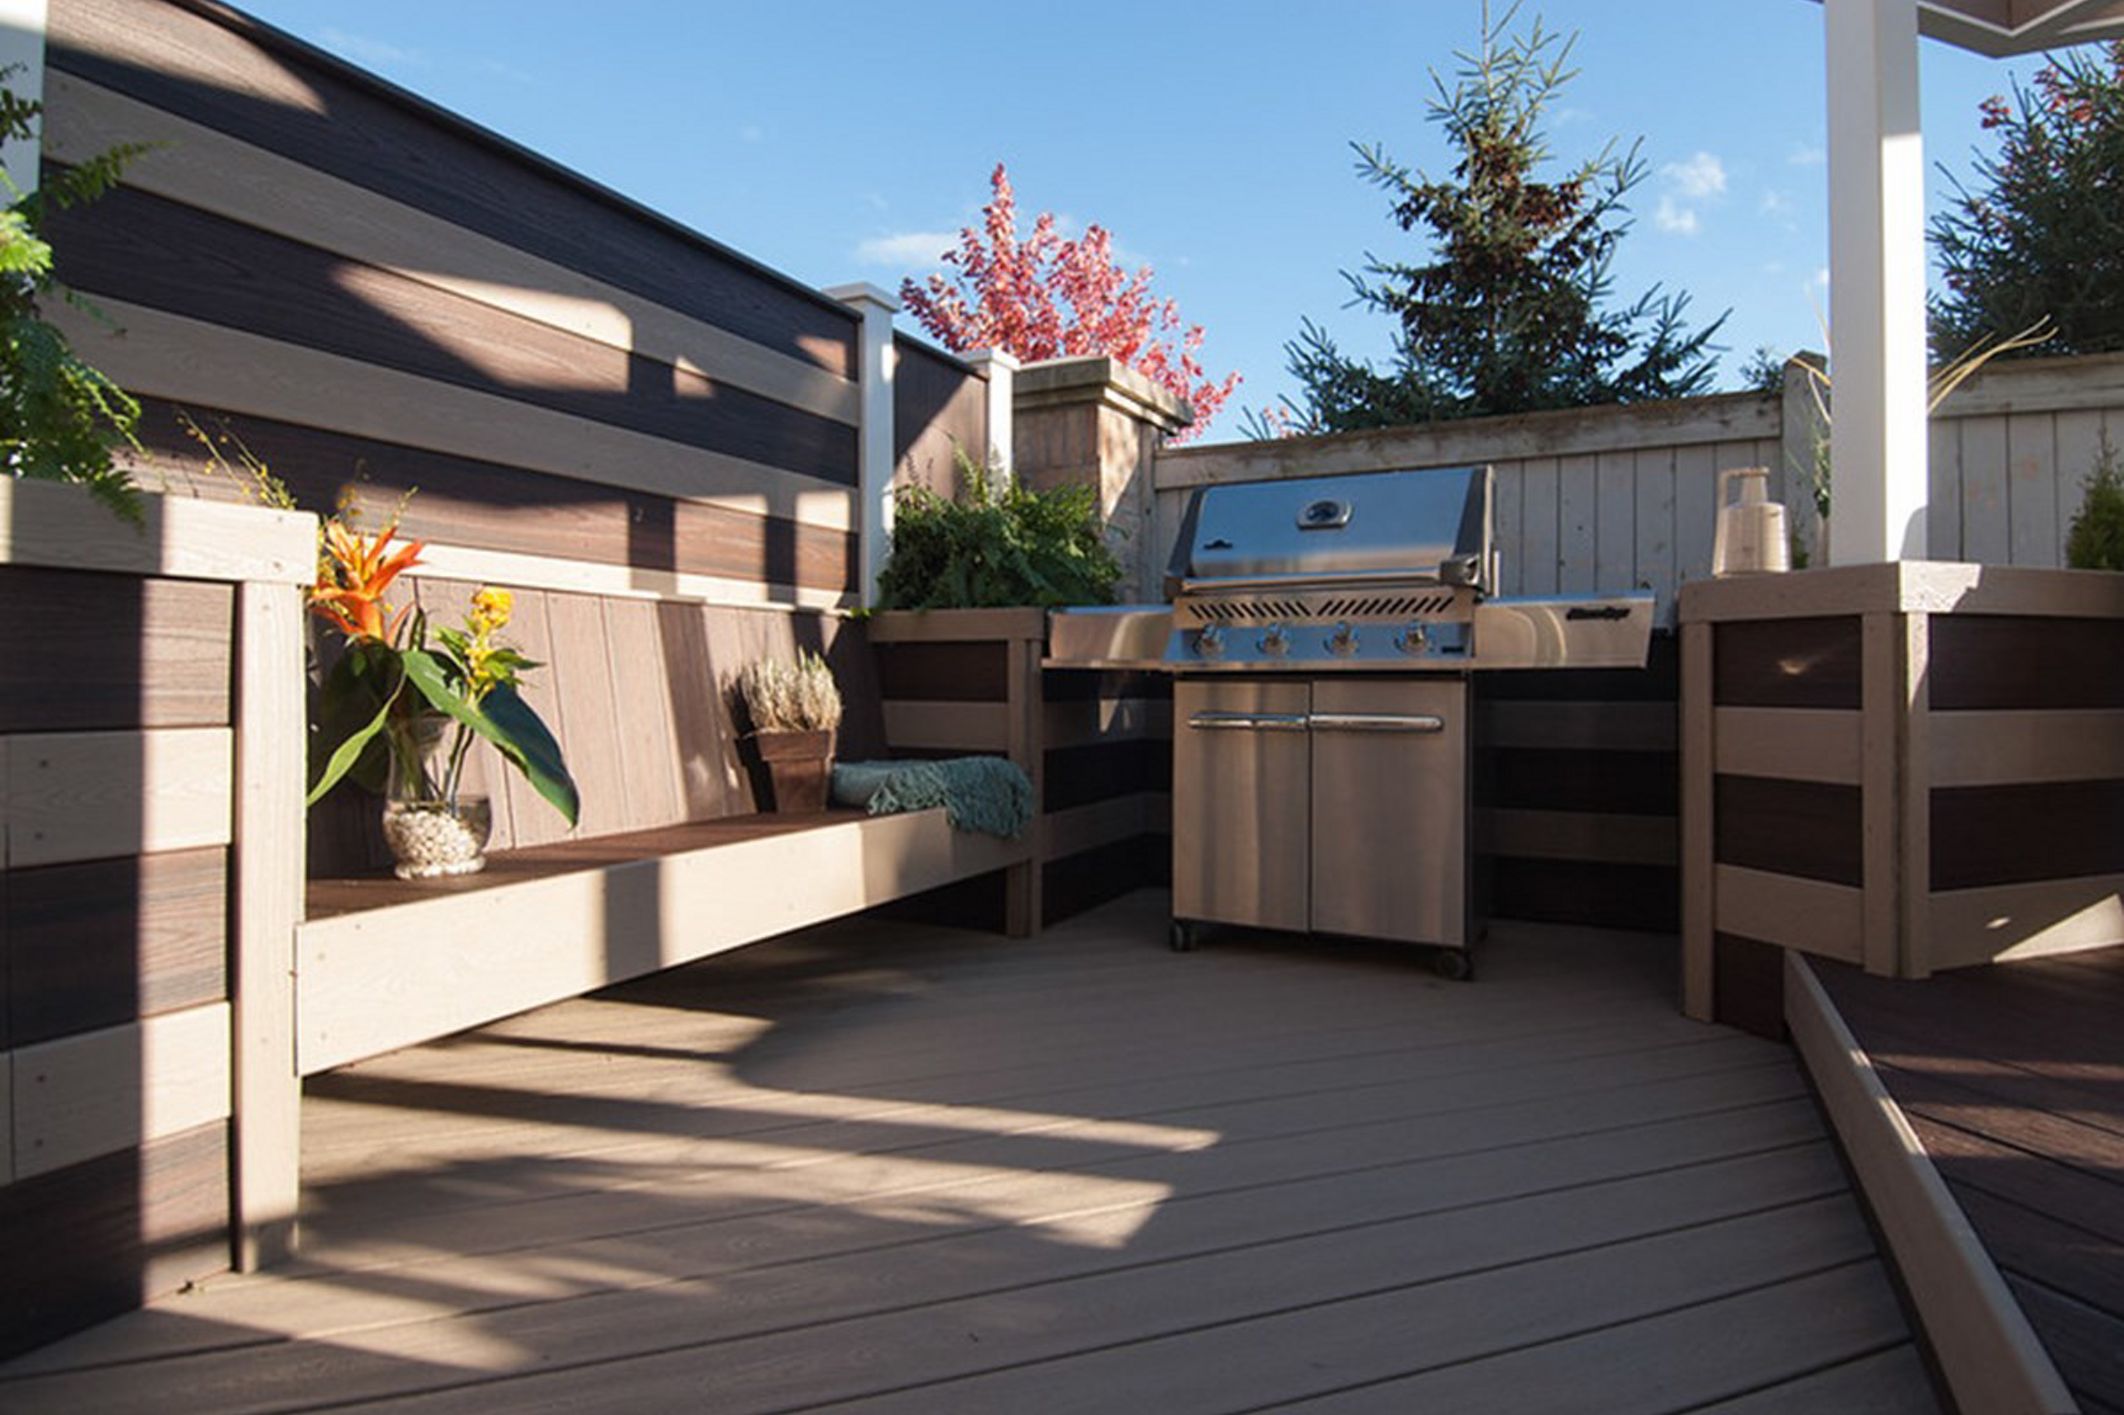 Ground level transcend deck with built in seating - Modern - Deck